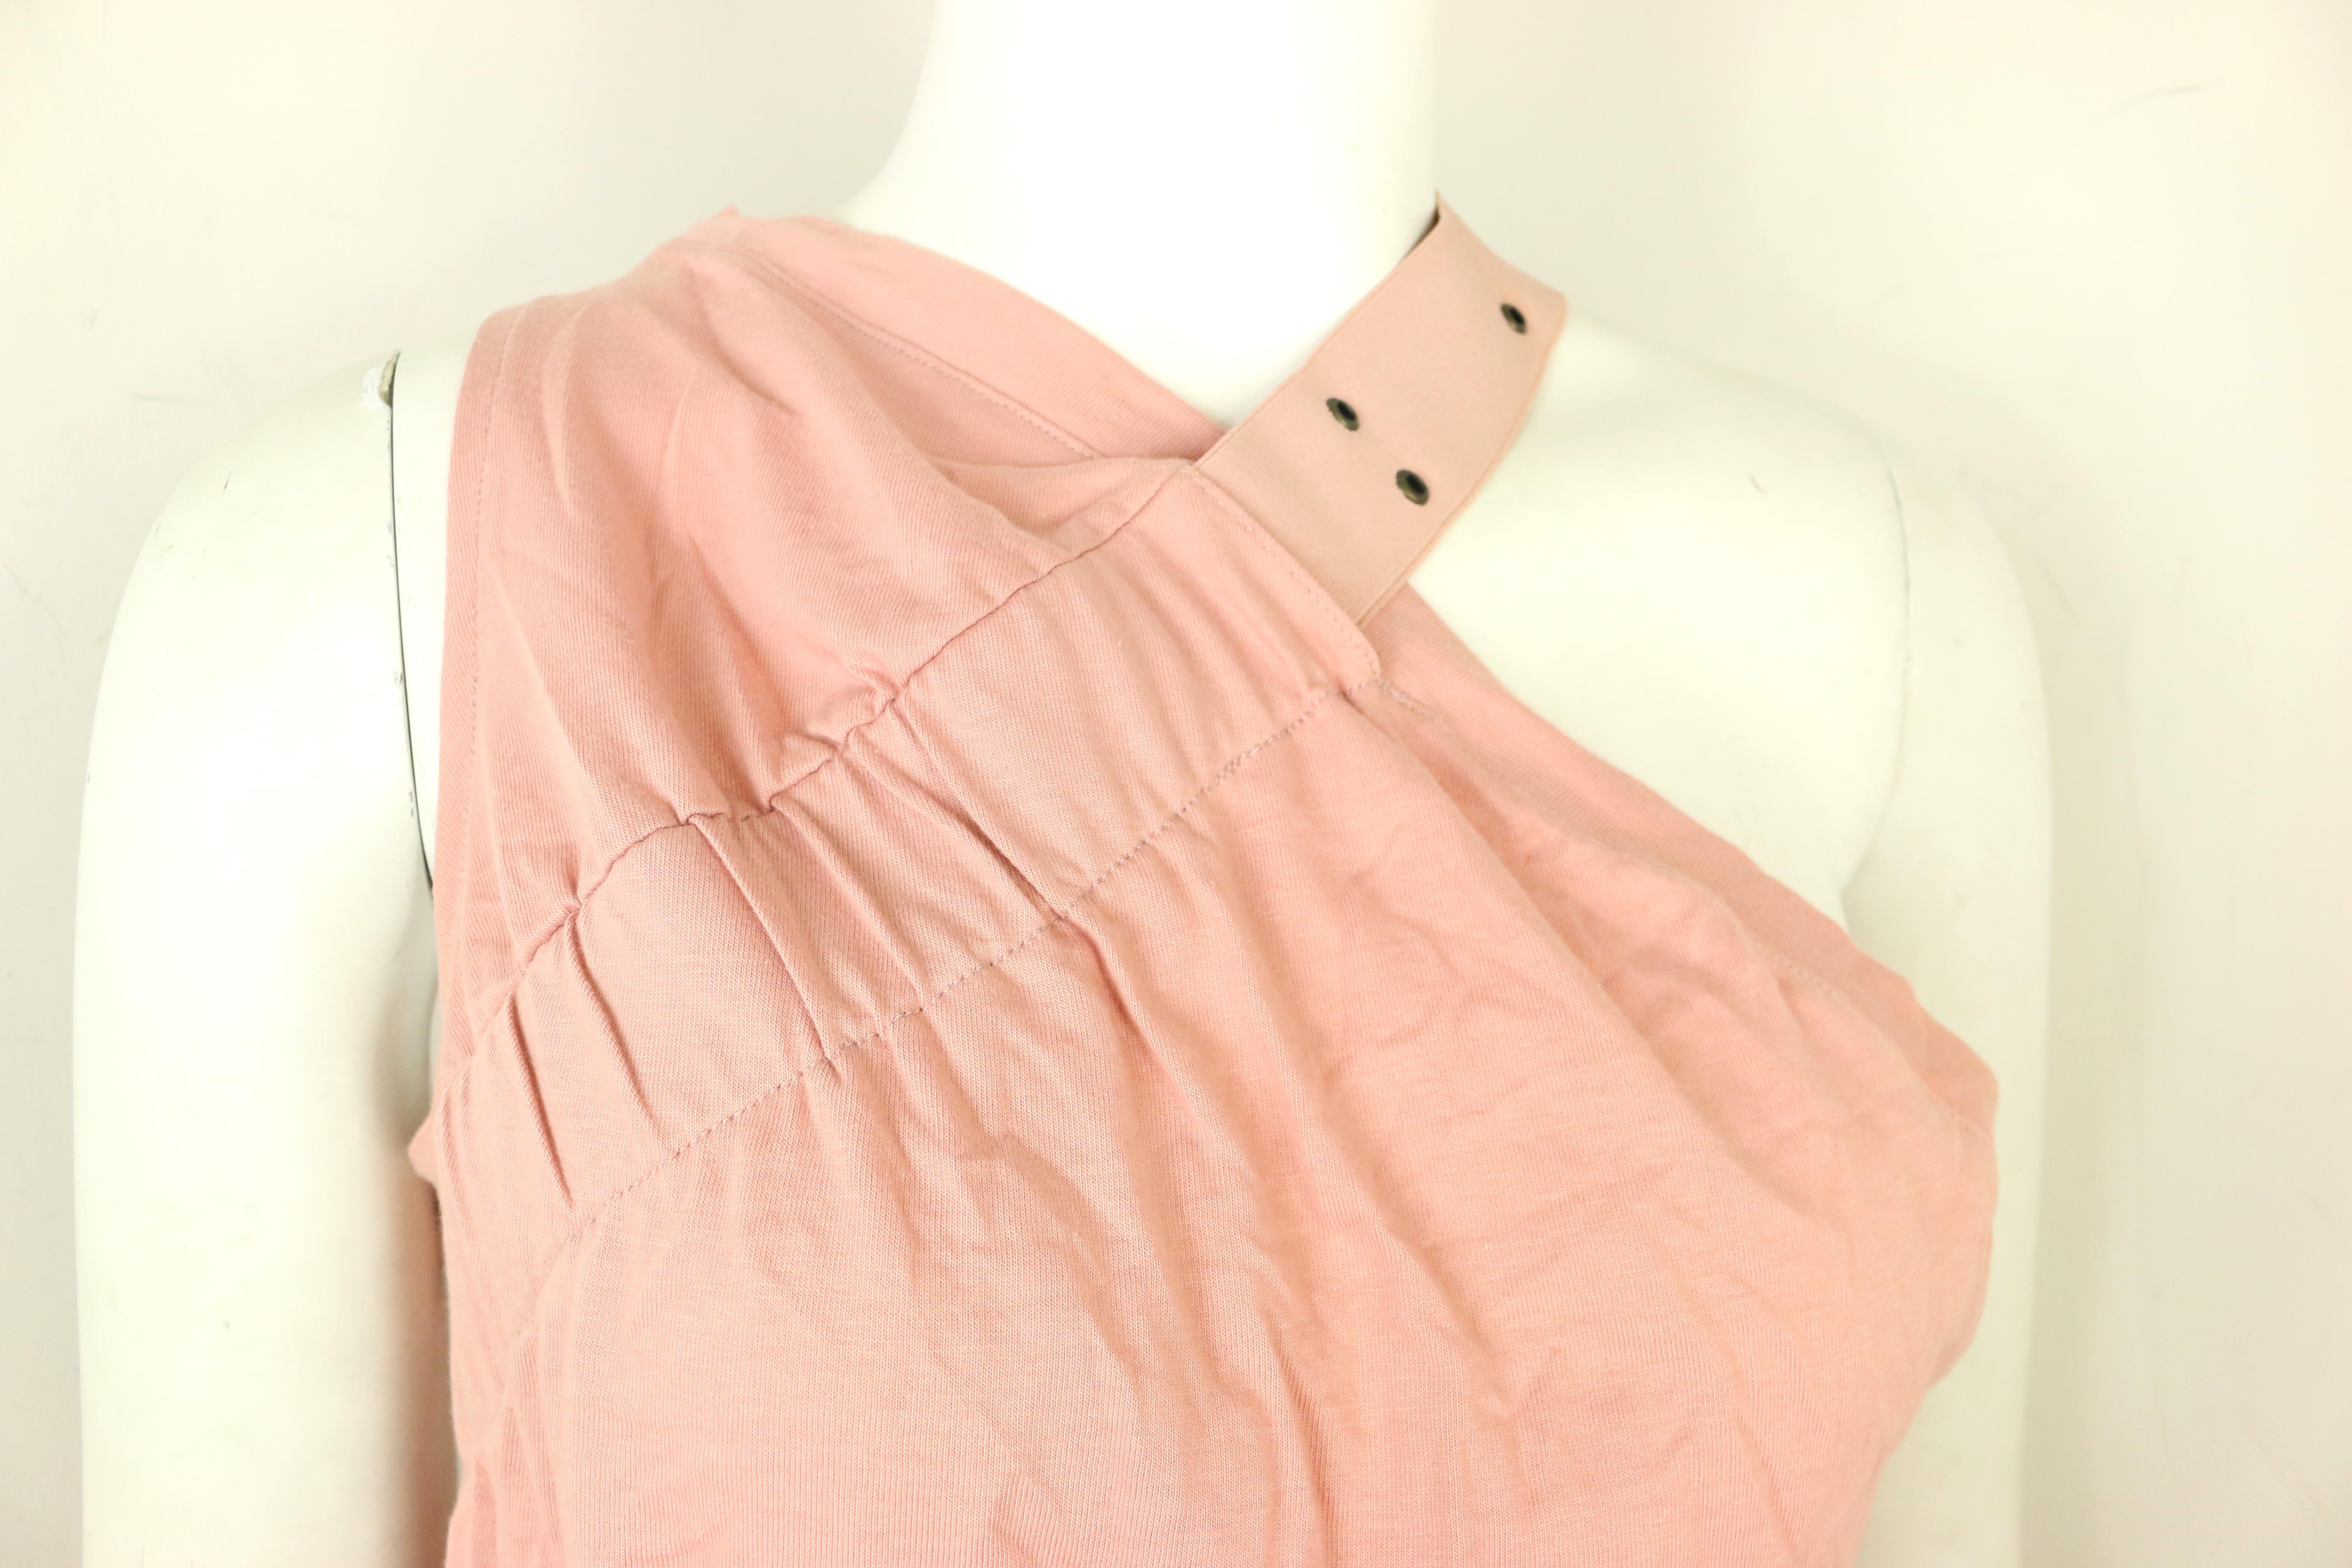 - Vintage 2000s Dior cotton pink tank top.

- Featuring an eyelet strap across the left shoulder to right bust. It has a lower armpit cut on the left side and higher on the right armpit. It's very deconstructed which is the signature design of John